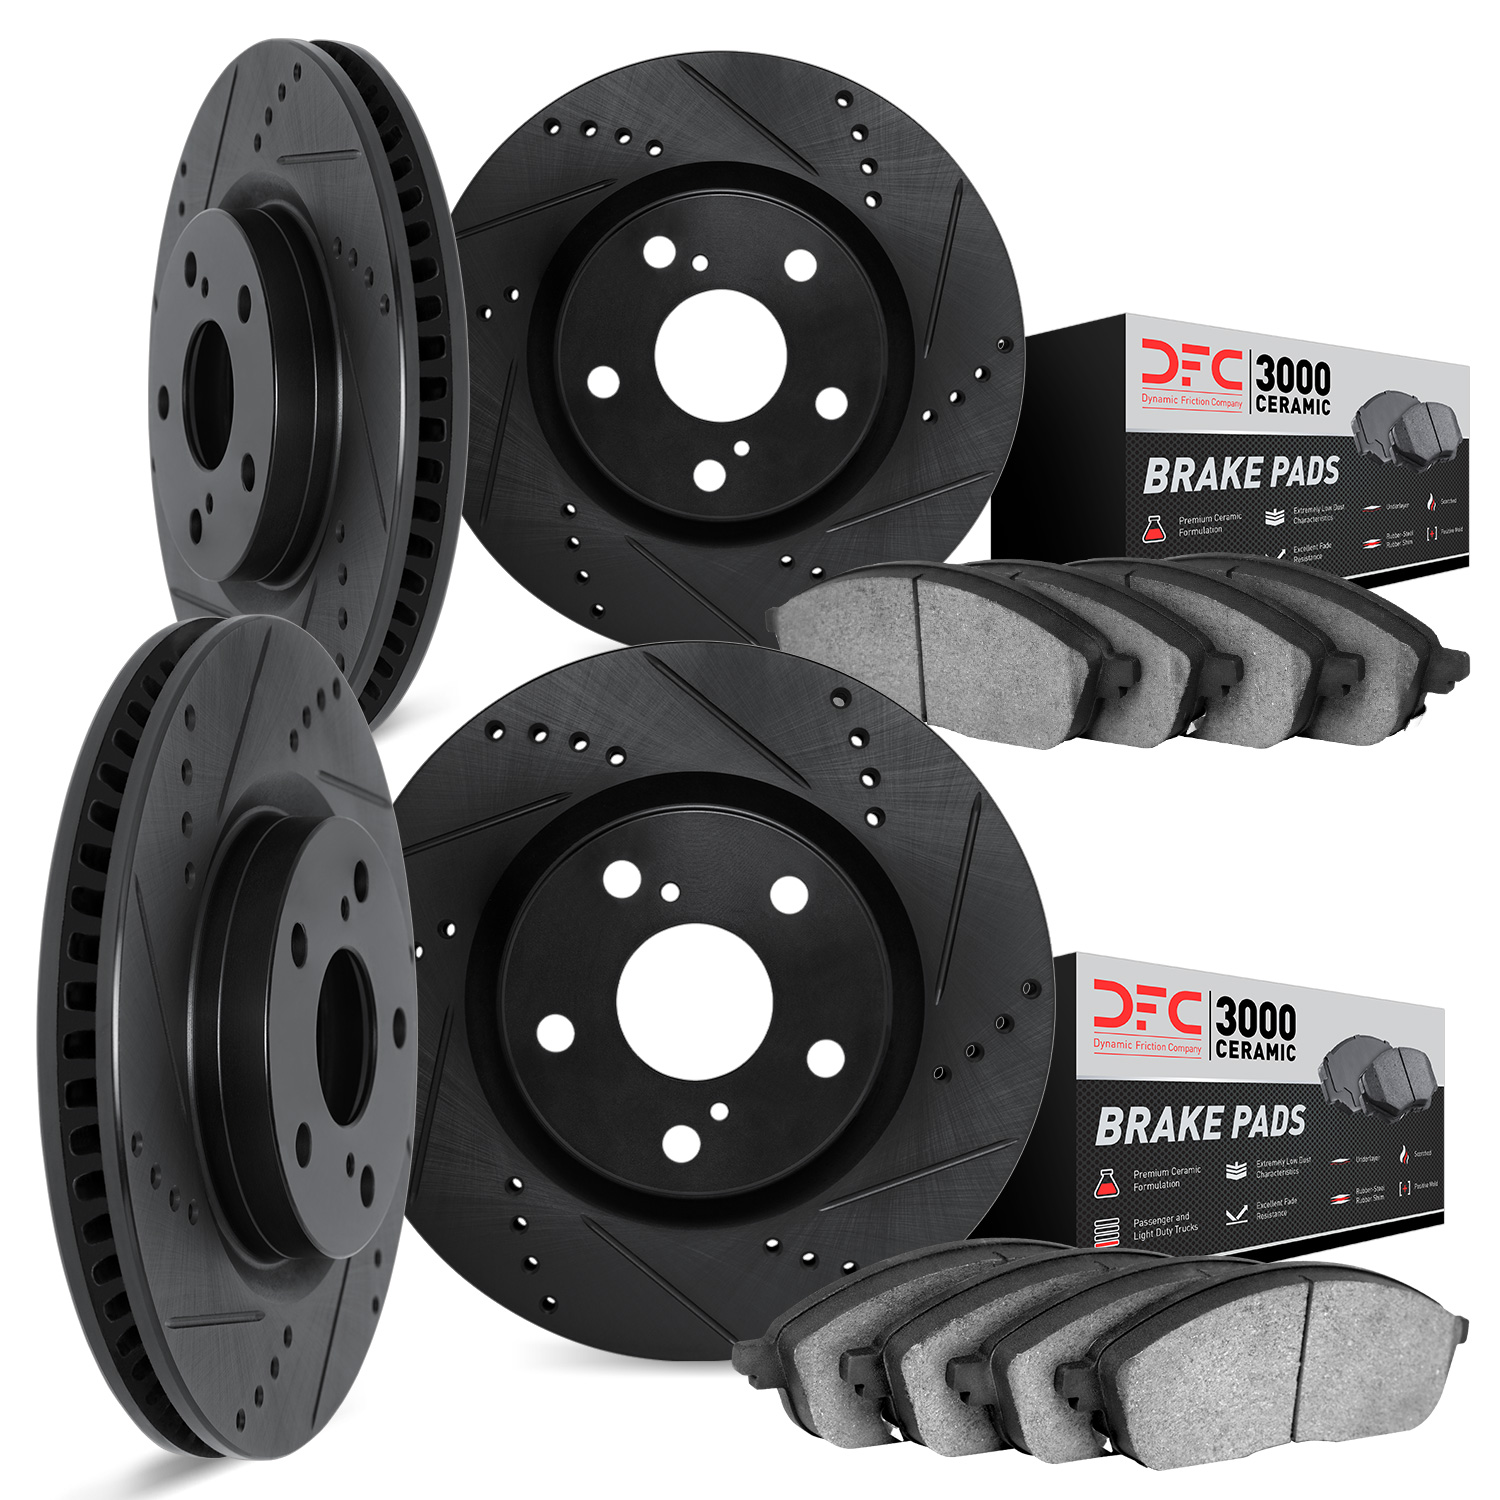 8304-31060 Drilled/Slotted Brake Rotors with 3000-Series Ceramic Brake Pads Kit [Black], 2006-2006 BMW, Position: Front and Rear